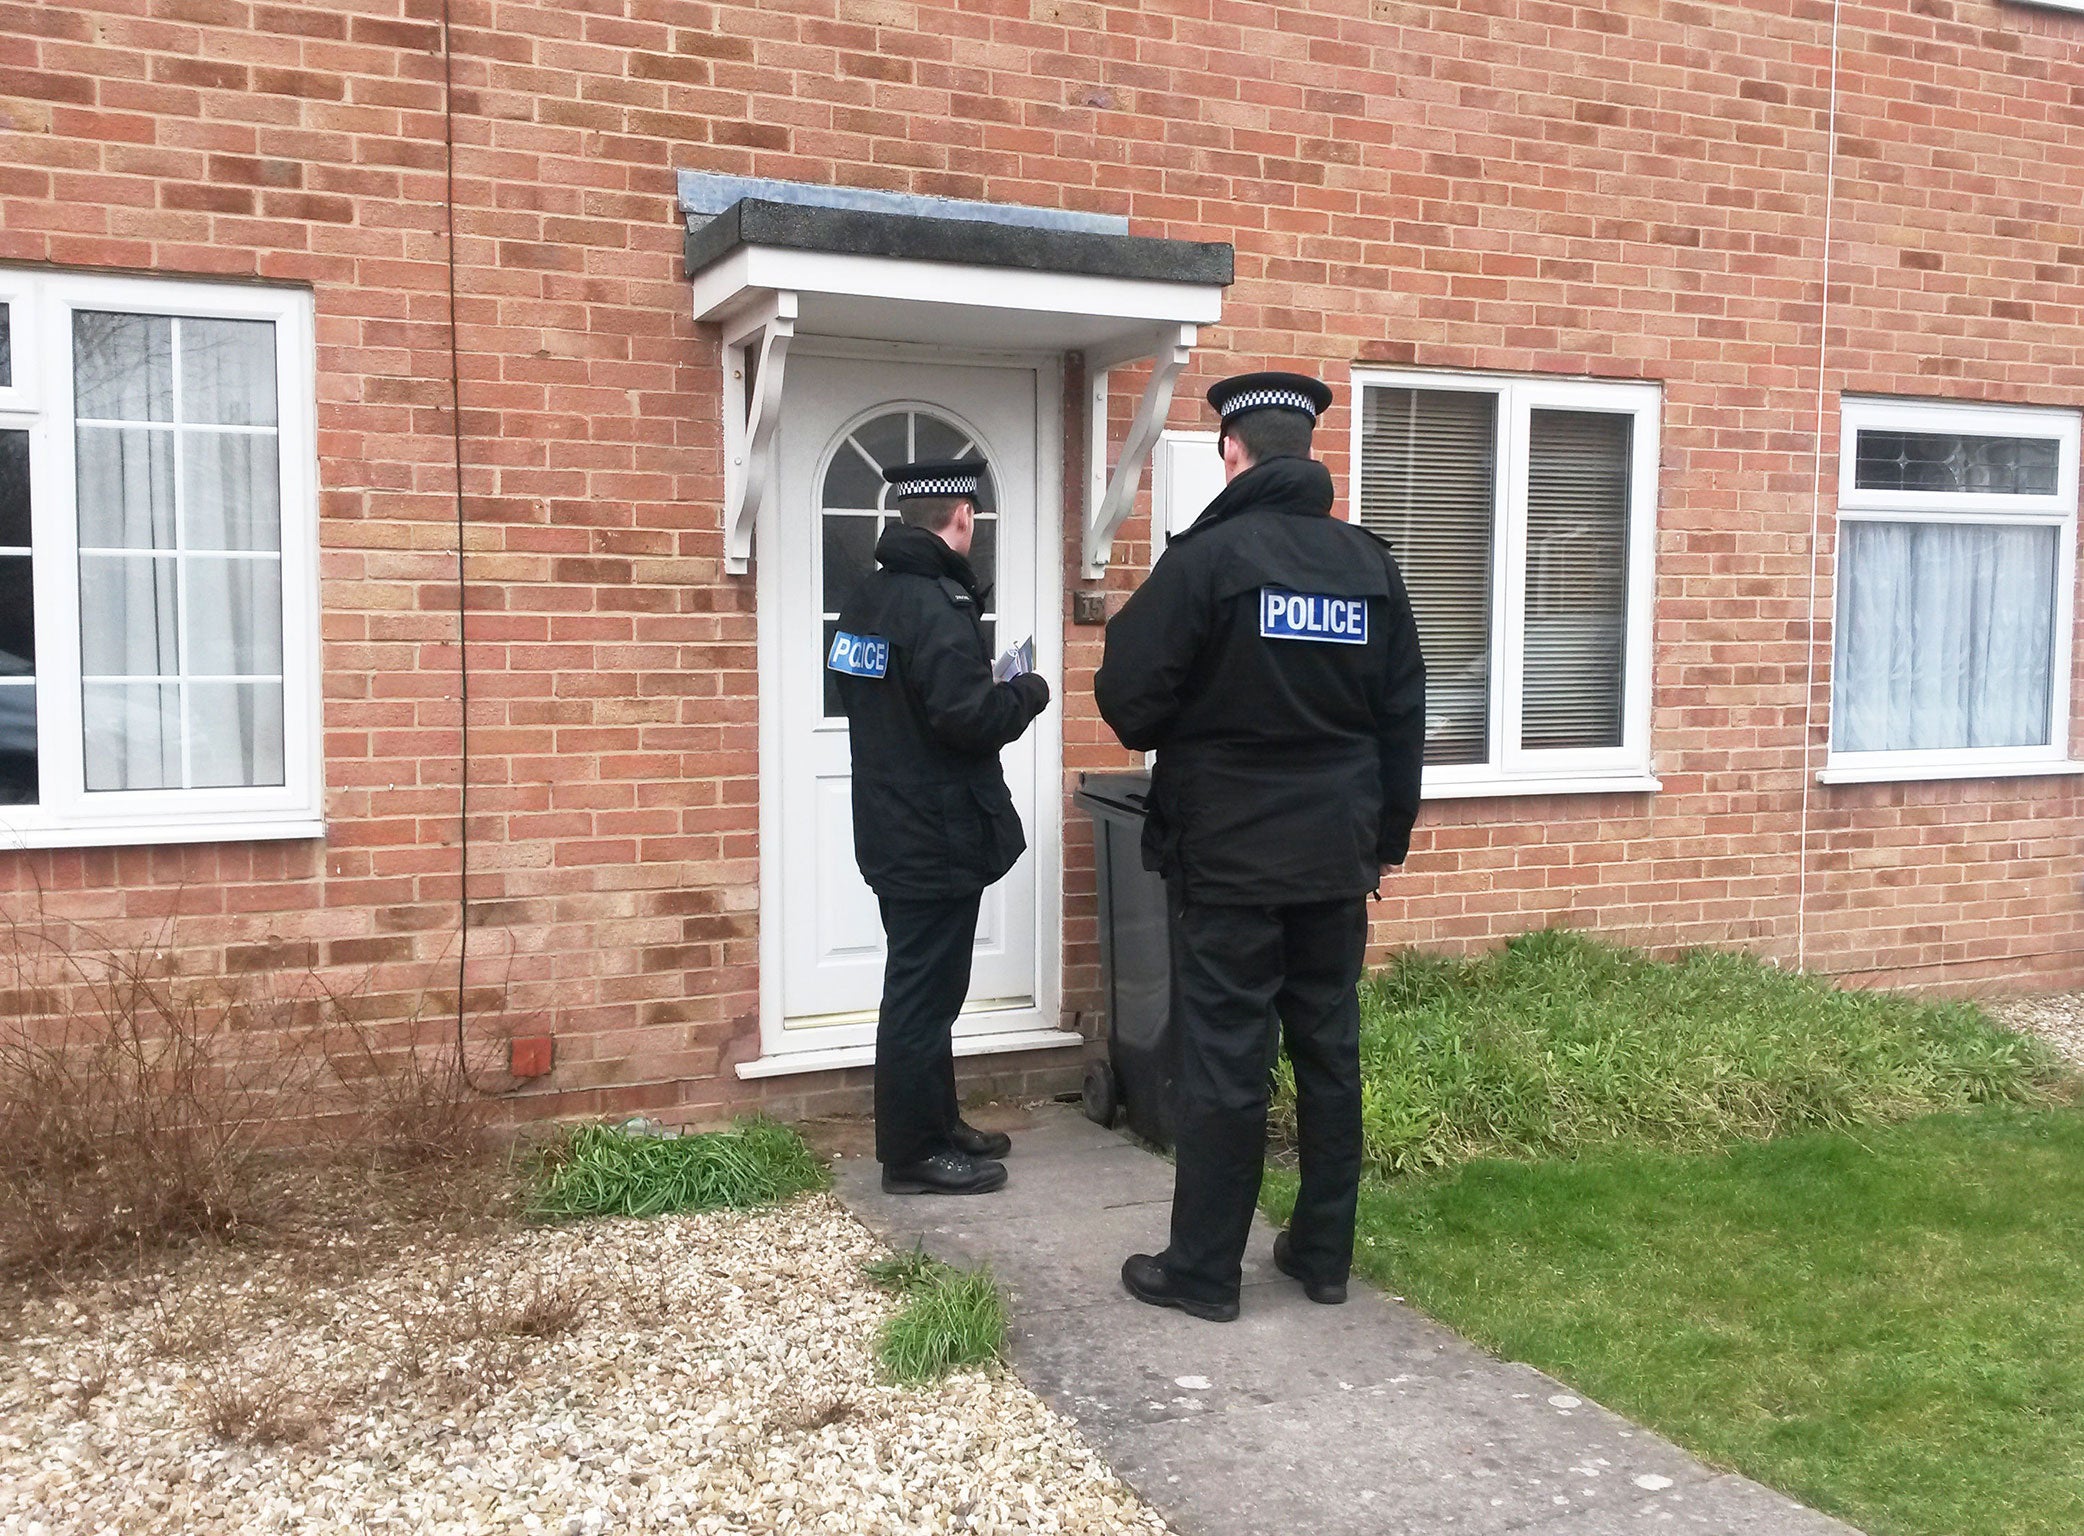 Police conduct door-to-door inquiries after a mother was tied up and sexually assaulted at knifepoint in front of her young child in a burglary at her home